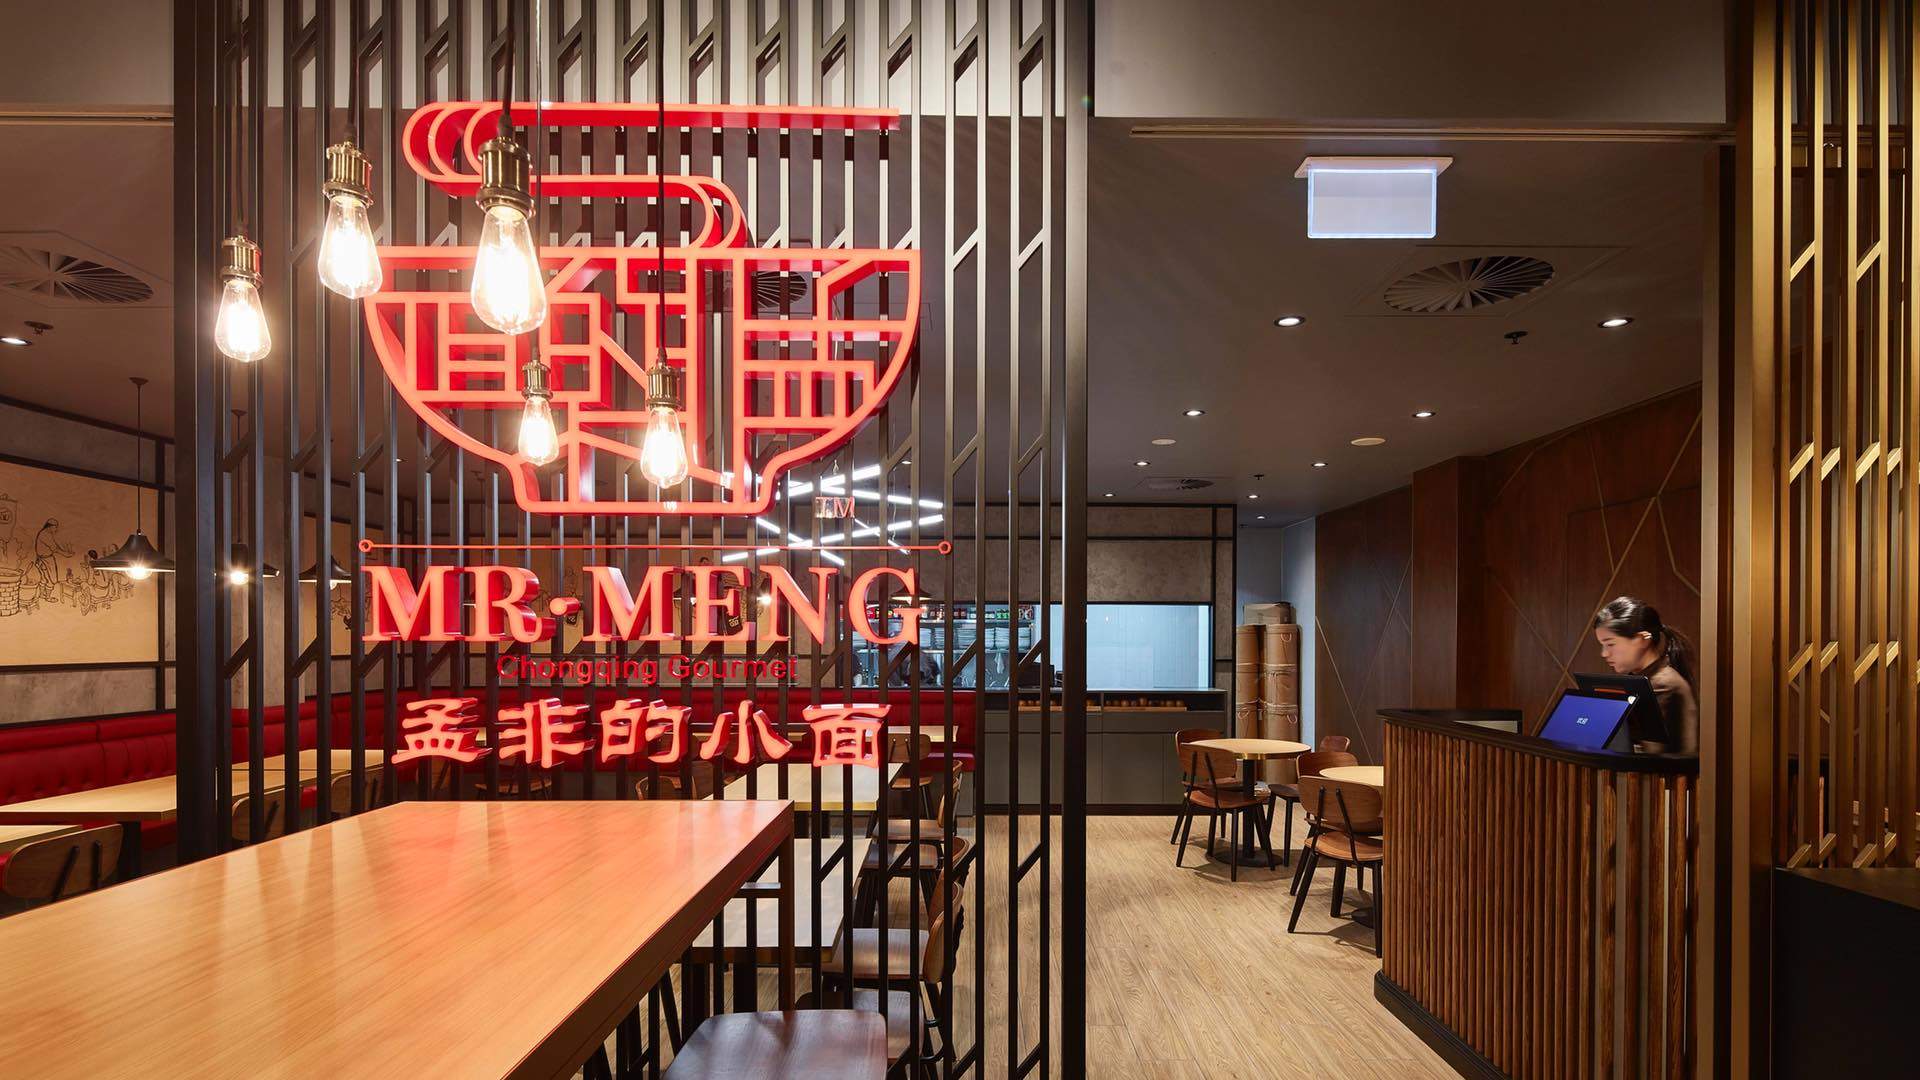 A New Asian Dining Precinct Has Opened on the Third Level of Market City